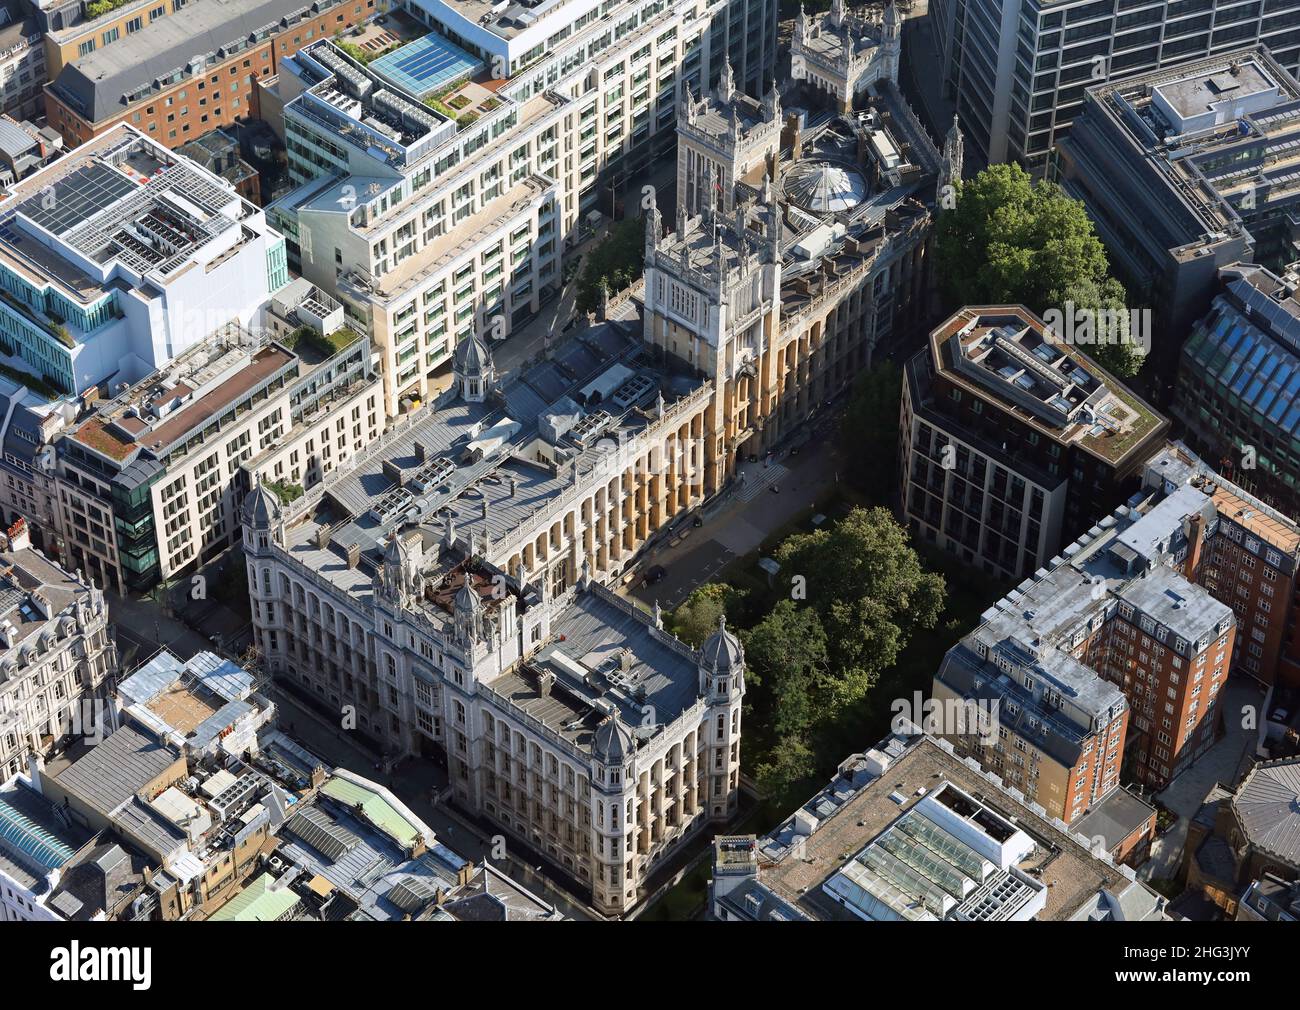 aerial view of The Maughan Library, on the Strand Campus at Kings College London Stock Photo